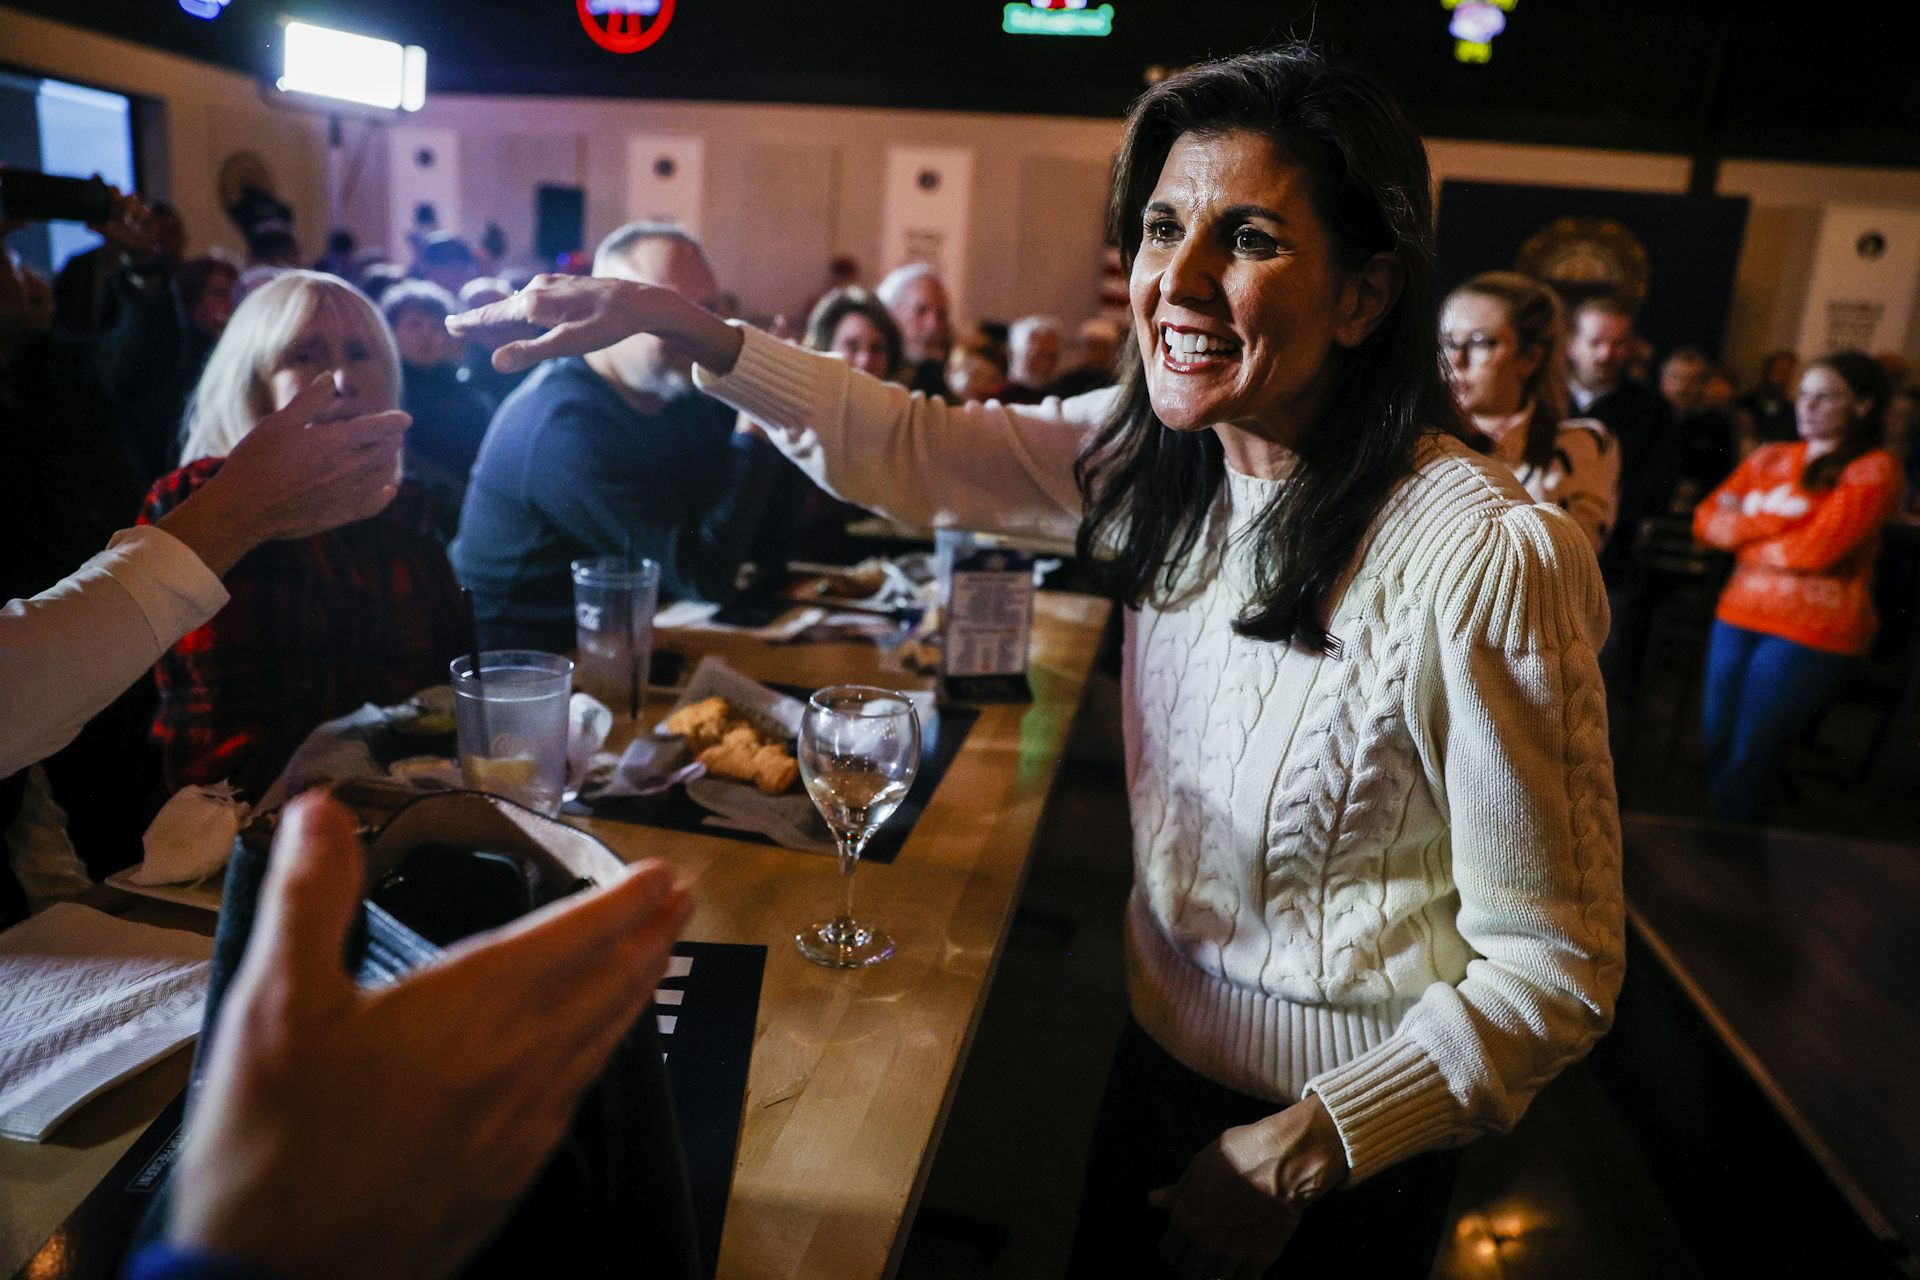 Women presidential candidates like Nikki Haley are more likely to ...